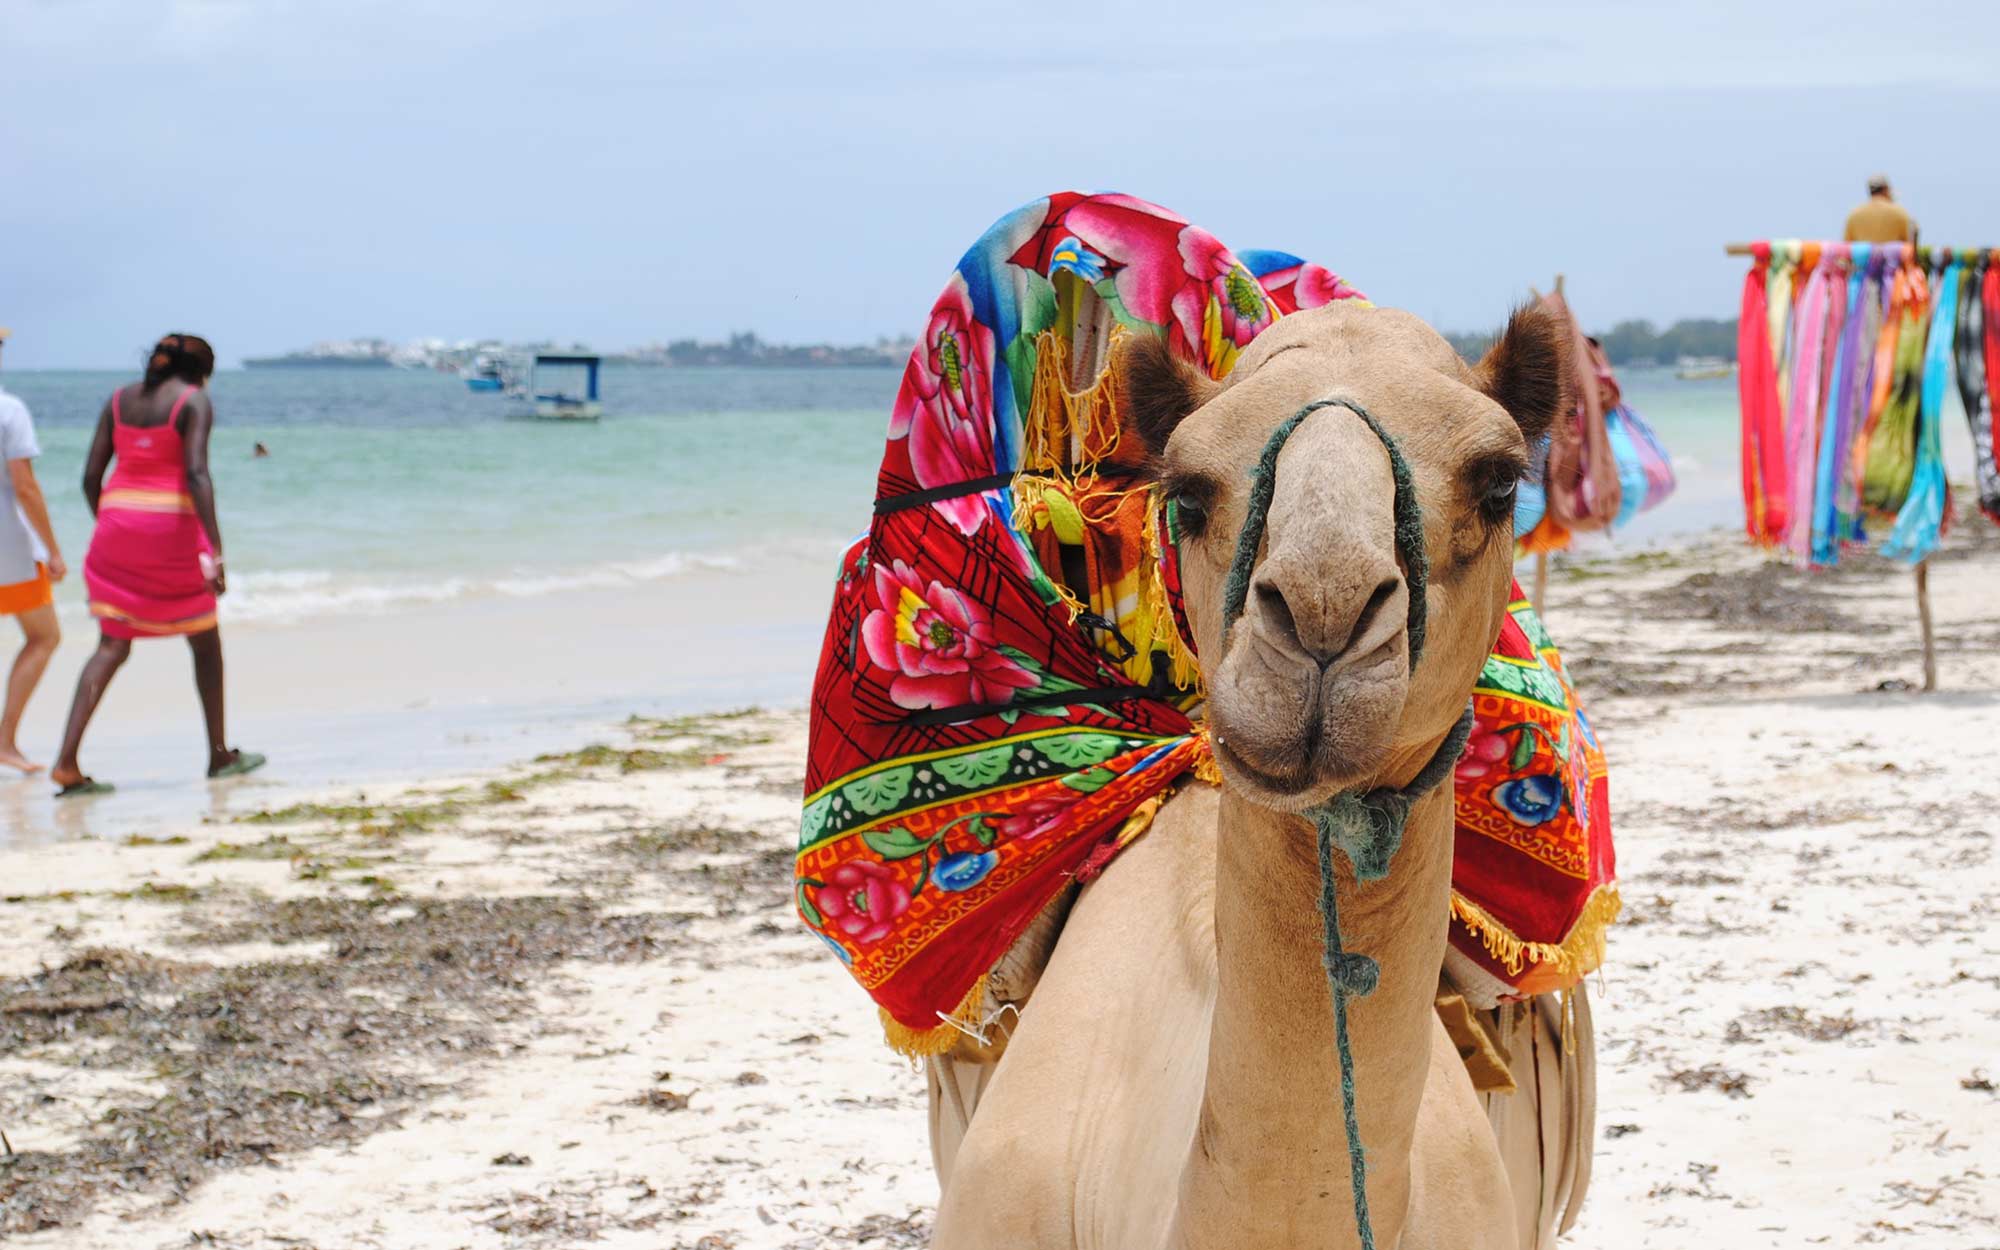 A pack camel with colorful saddle on its hump stands on a beach in Kenya